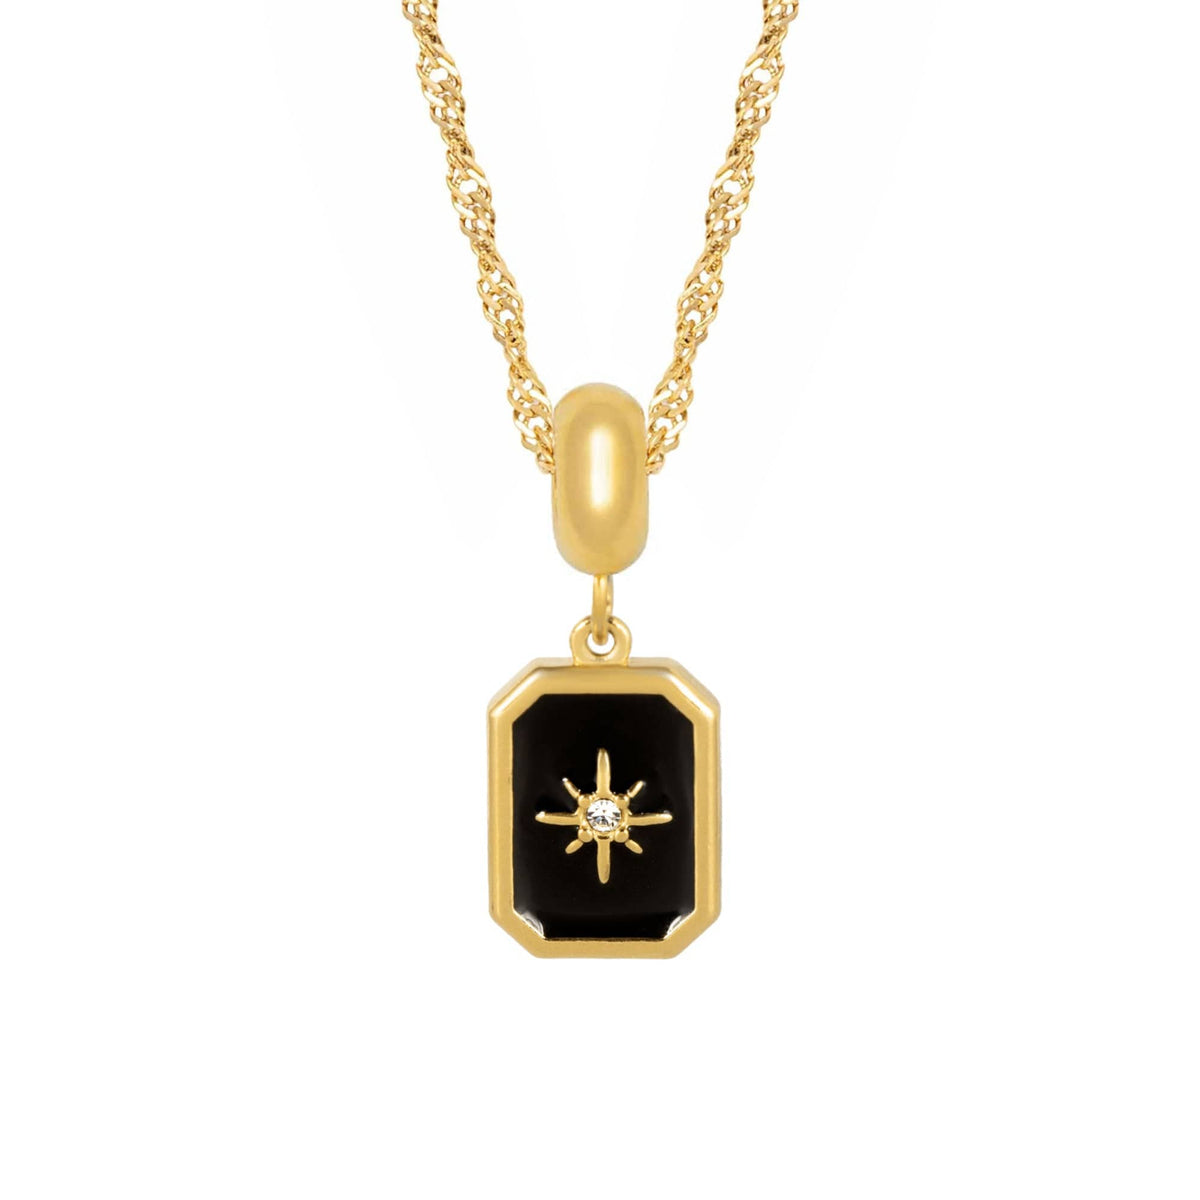 BohoMoon Stainless Steel Miami Star Necklace Gold